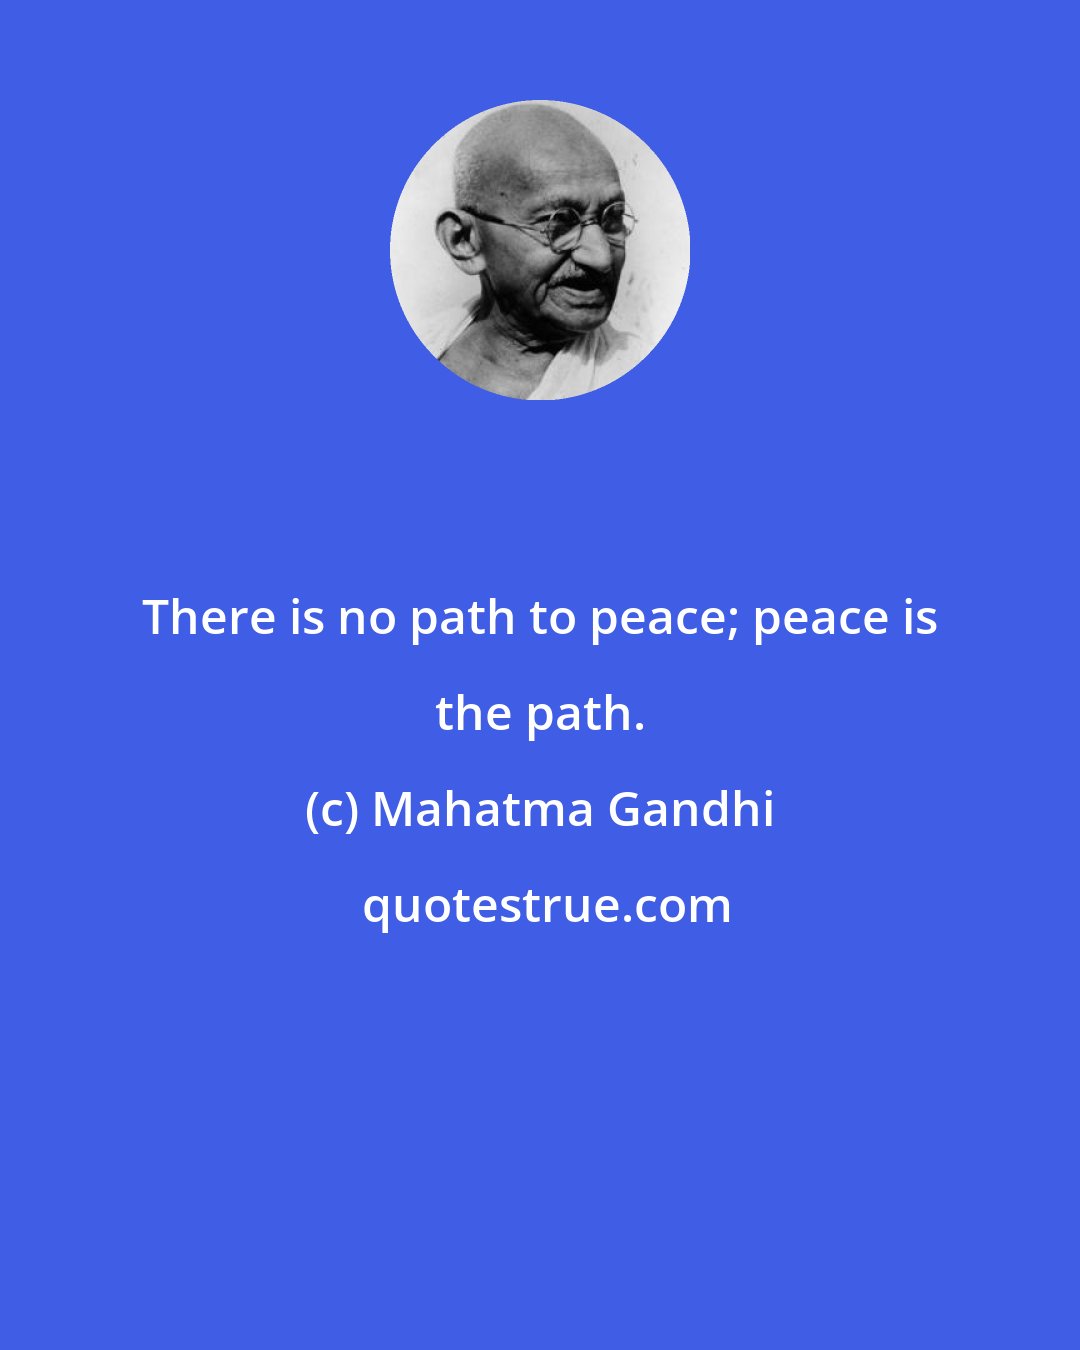 Mahatma Gandhi: There is no path to peace; peace is the path.